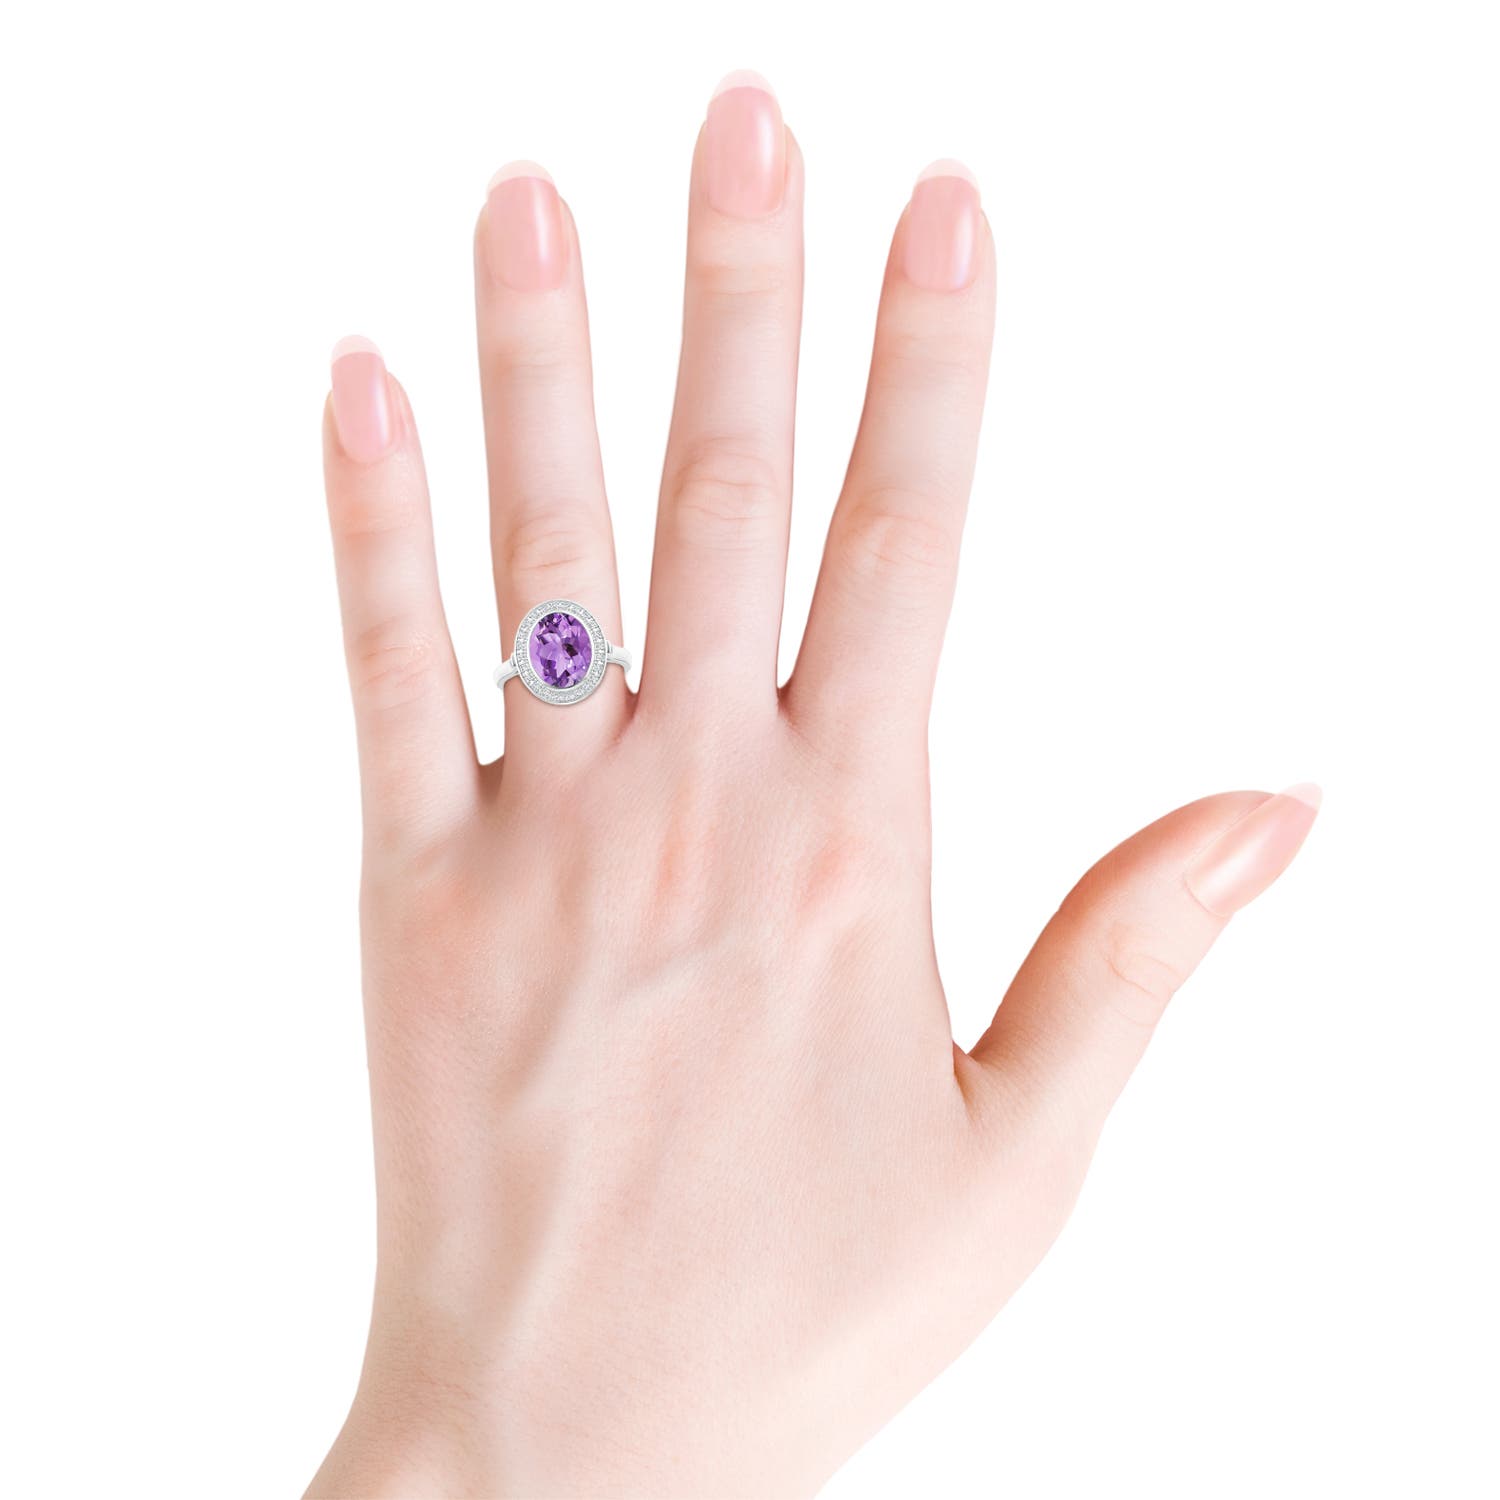 A - Amethyst / 2.44 CT / 14 KT White Gold